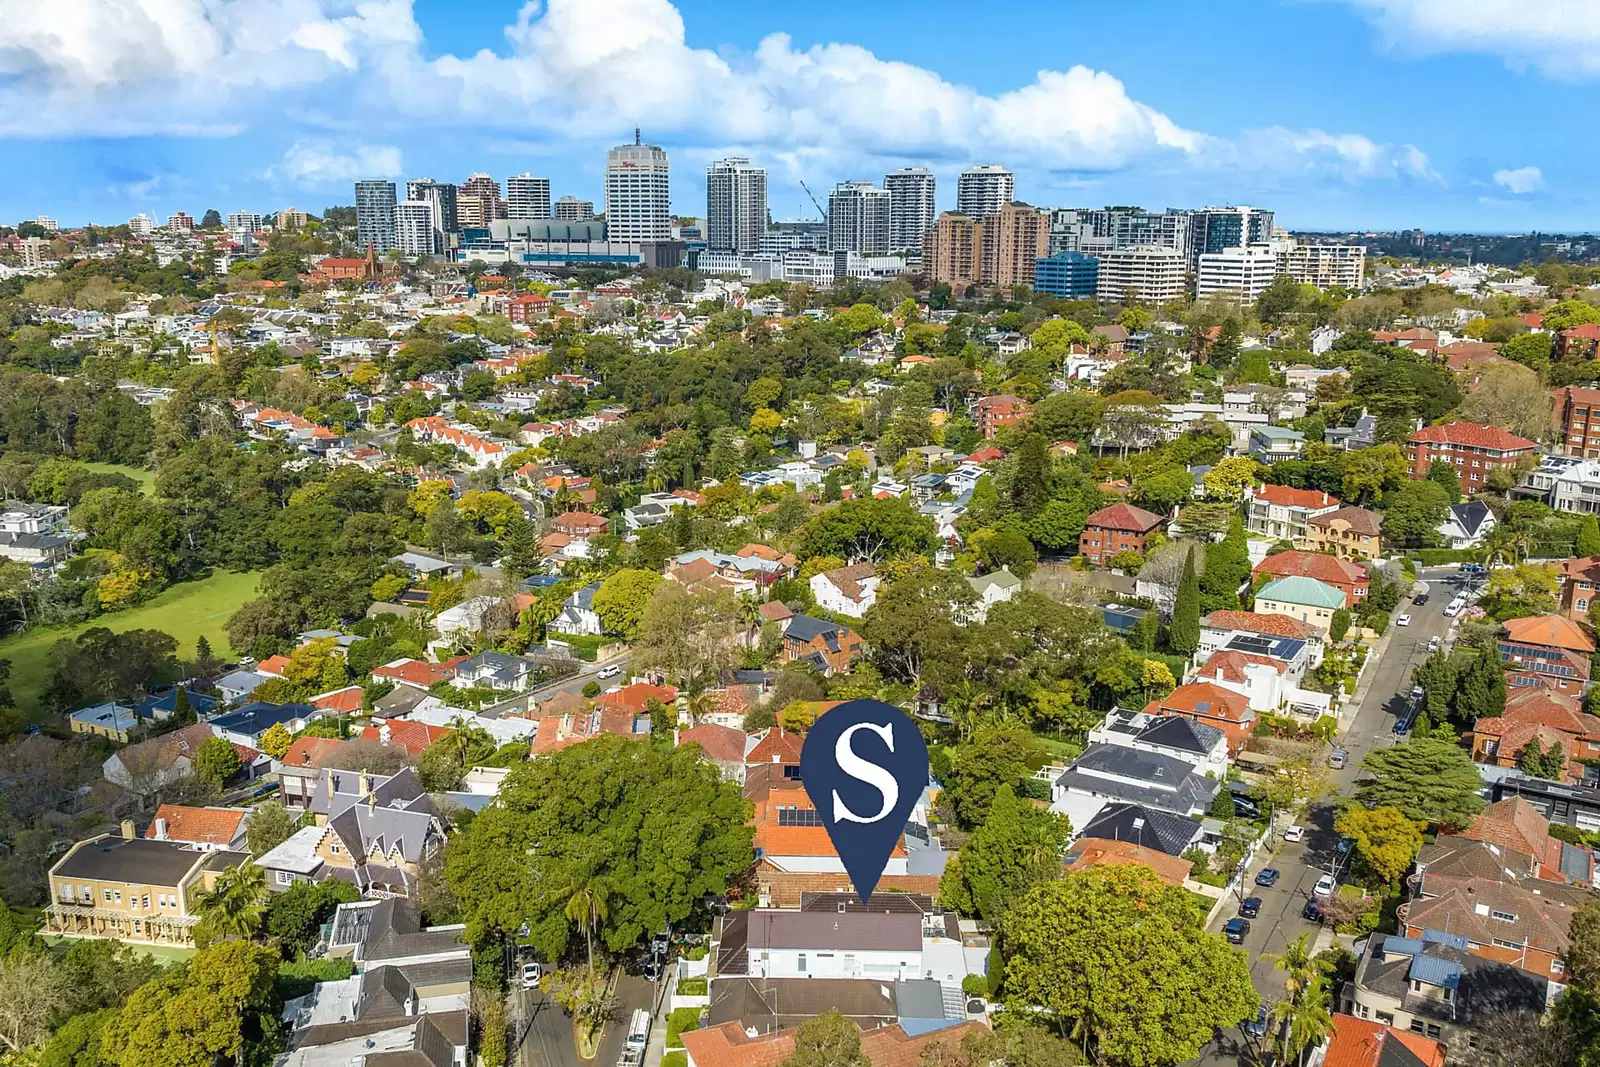 Photo #18: 15 Roslyndale Avenue, Woollahra - Sold by Sydney Sotheby's International Realty